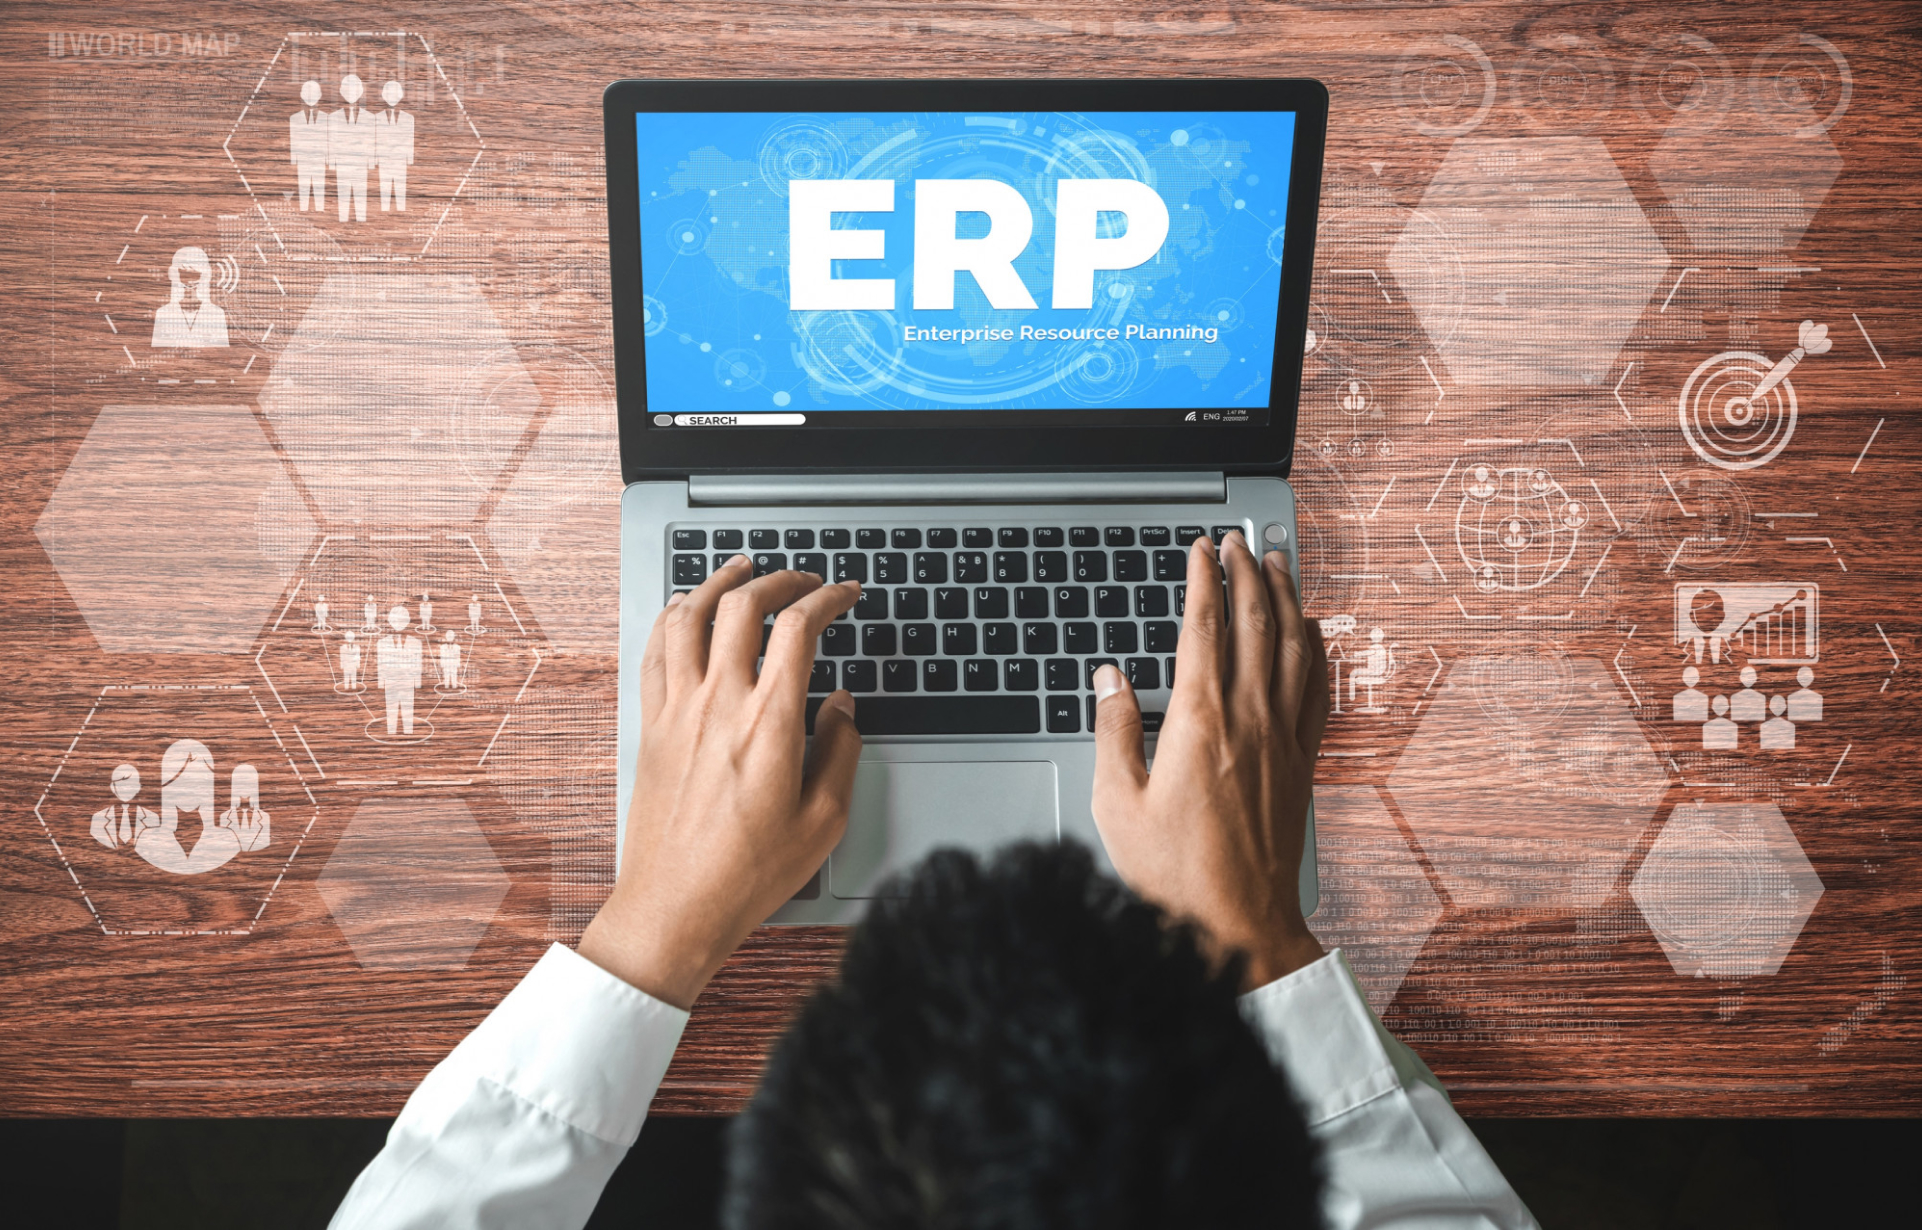 How can Softqube Technologies help you Build Custom ERP Software?